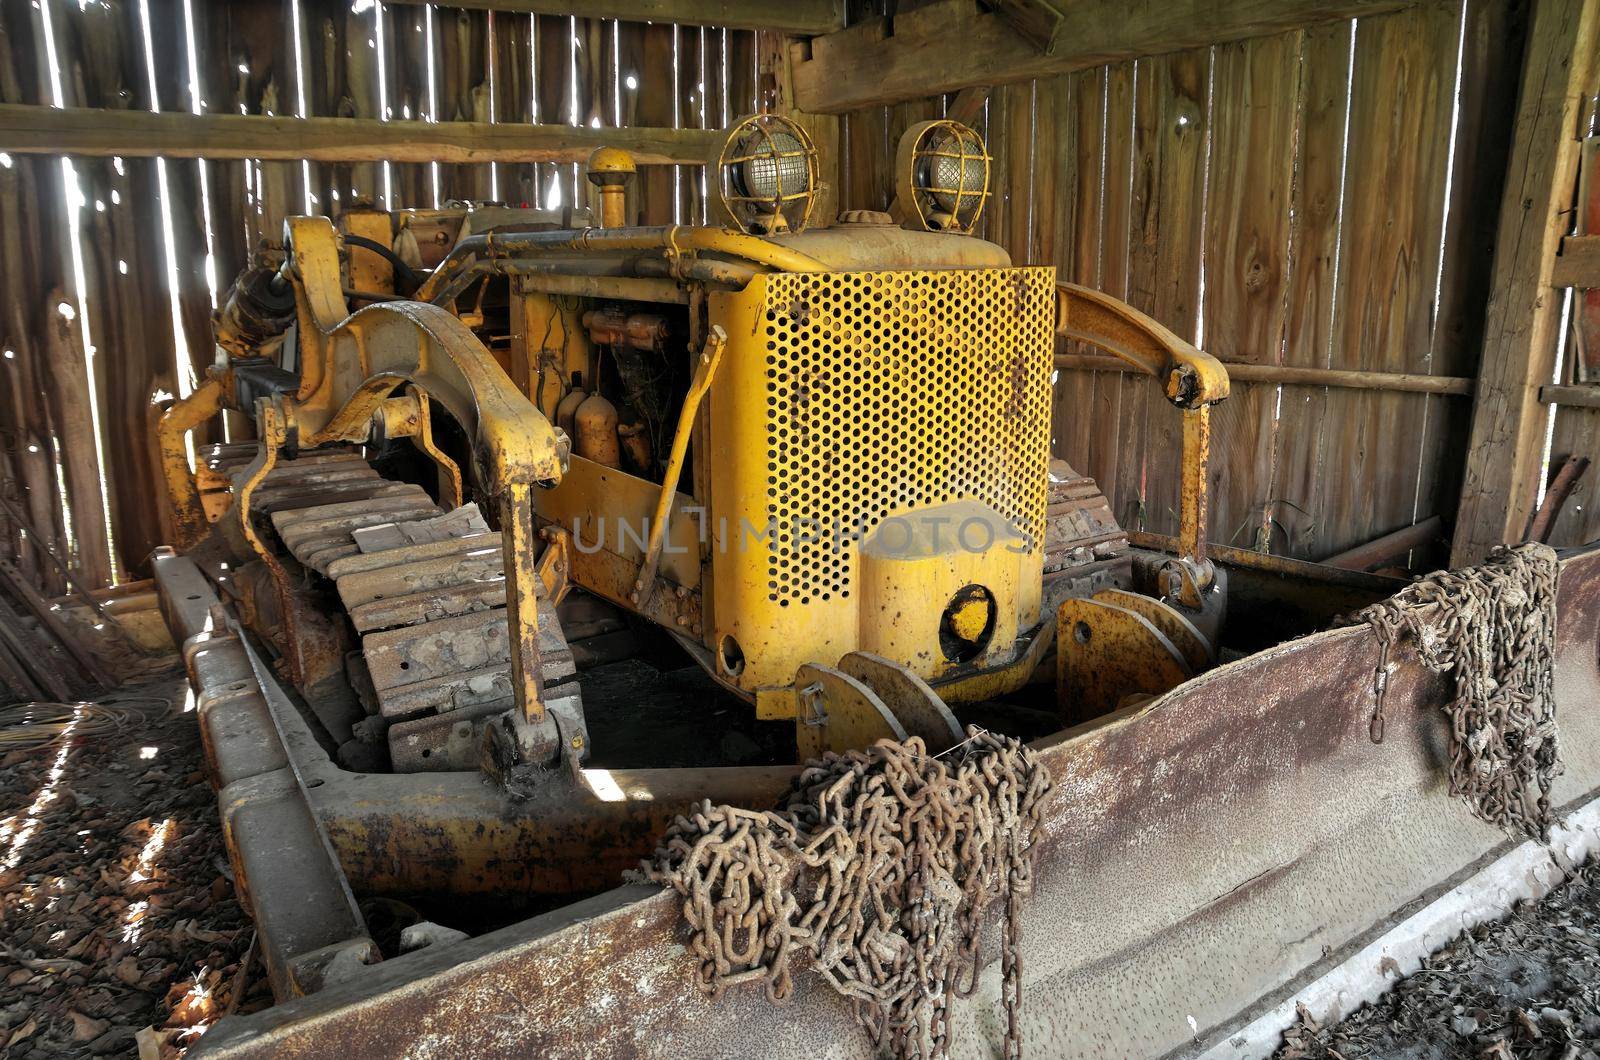 Antique Vintage Bulldozer Stored in an Old Rustic Barn by markvandam